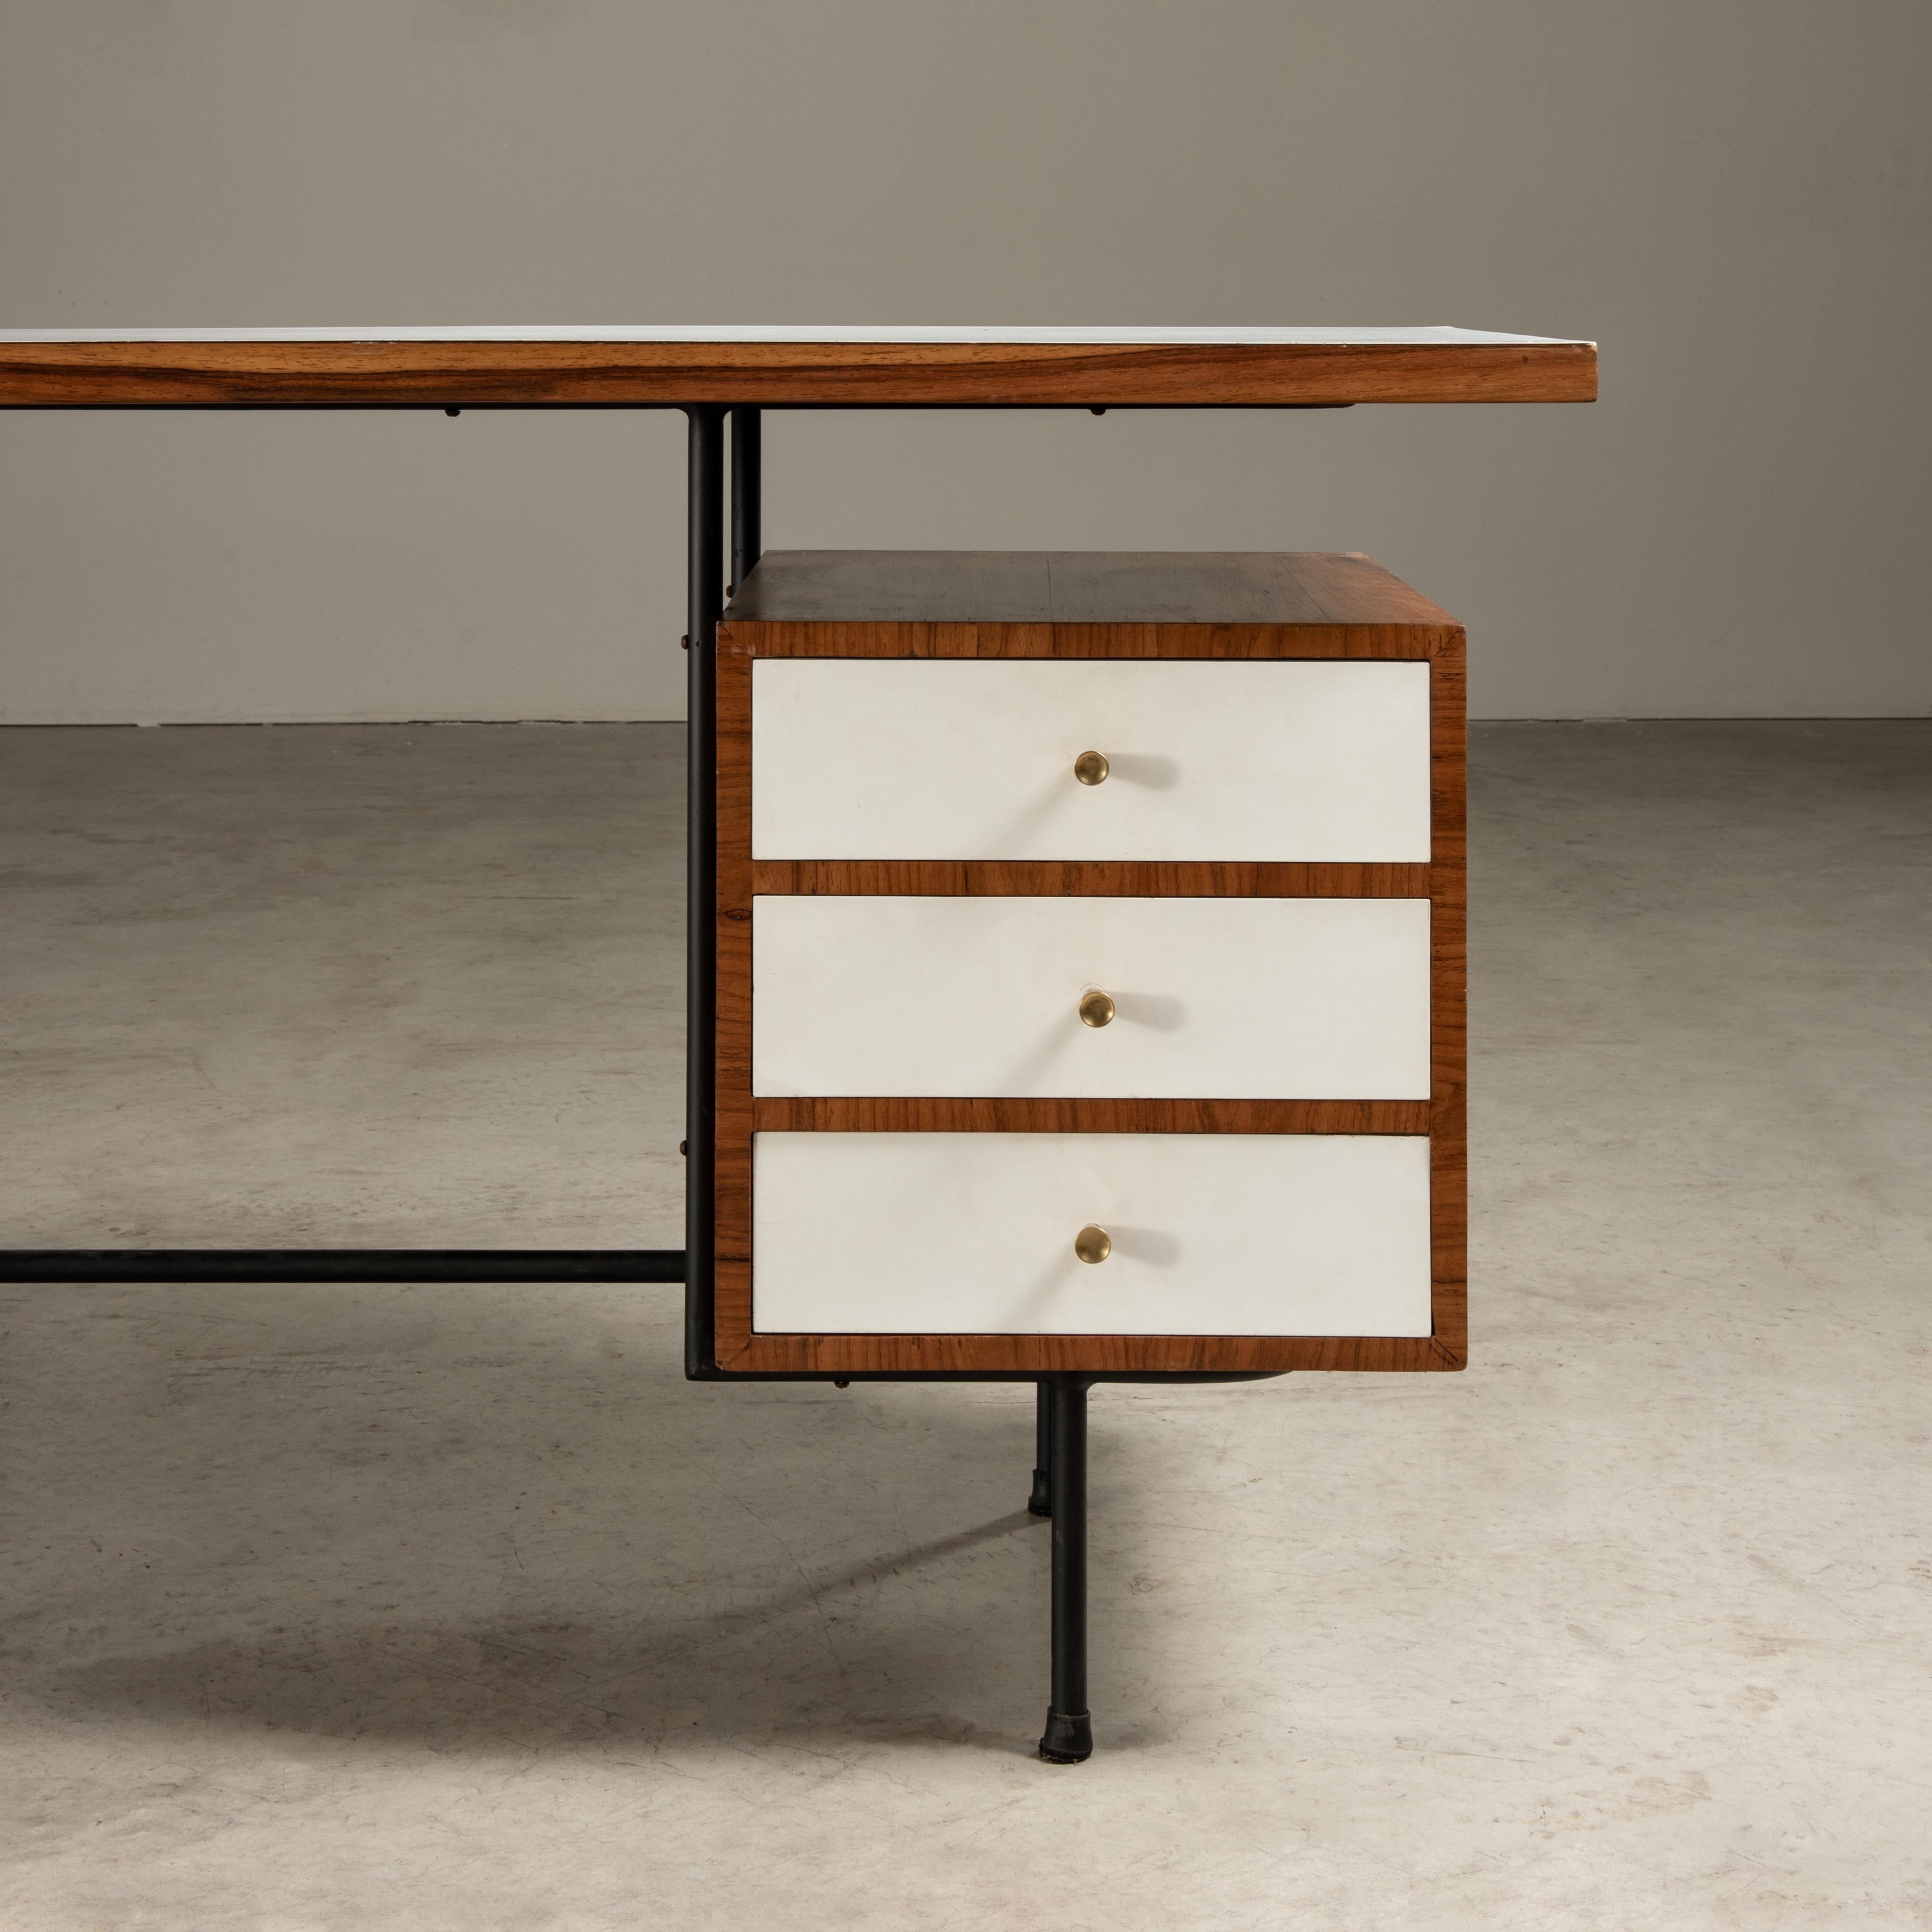 Architectural Desk in Iron and Wood, by Unilabor, Brazilian Mid-Century Modern   For Sale 2